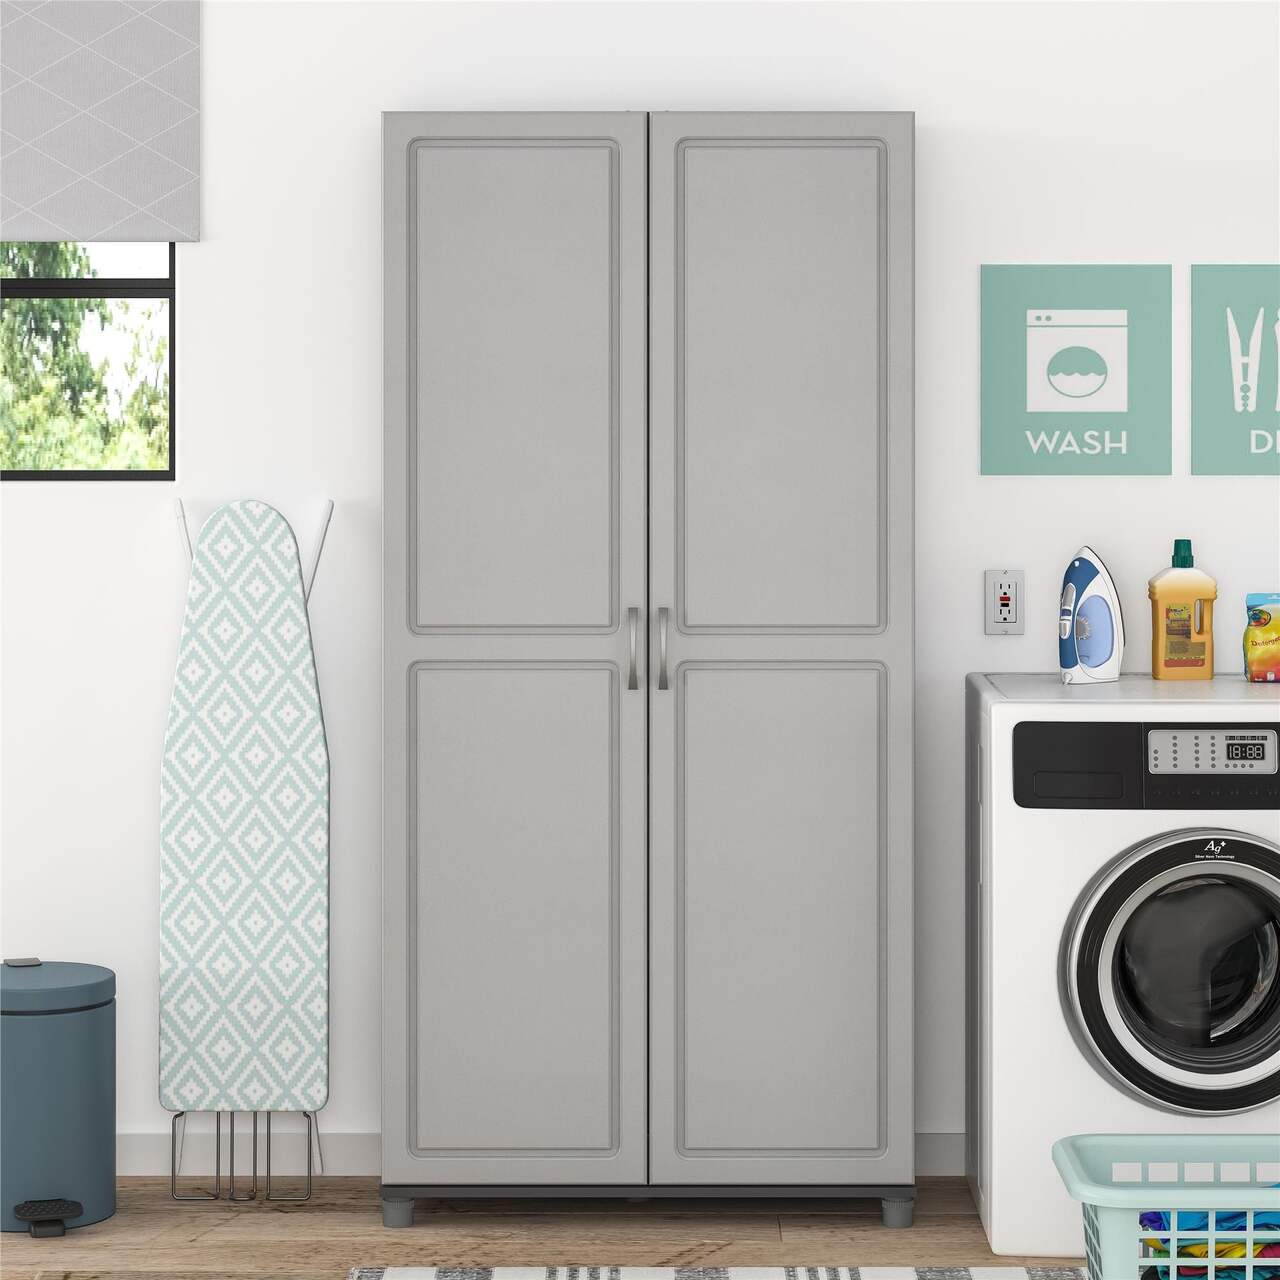 https://media-www.canadiantire.ca/product/living/home-decor/furniture/7746772/dorel-kendall-36-utility-storage-cabinet-grey-c5ba7c14-d086-45d8-a614-6f9e932f6f36-jpgrendition.jpg?imdensity=1&imwidth=1244&impolicy=mZoom